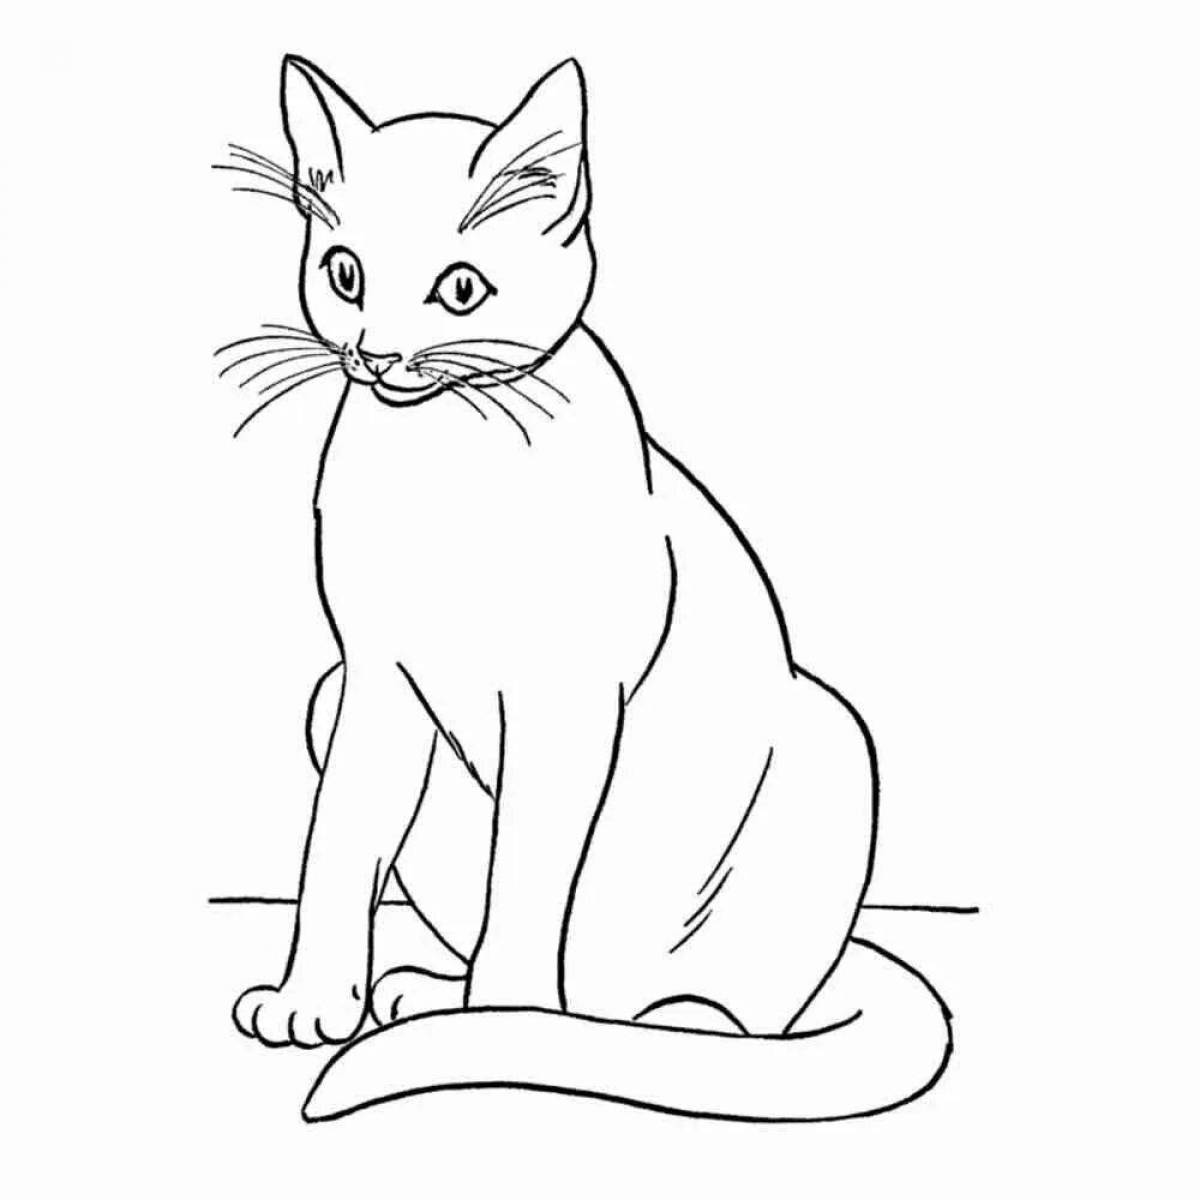 Glittering cat coloring page